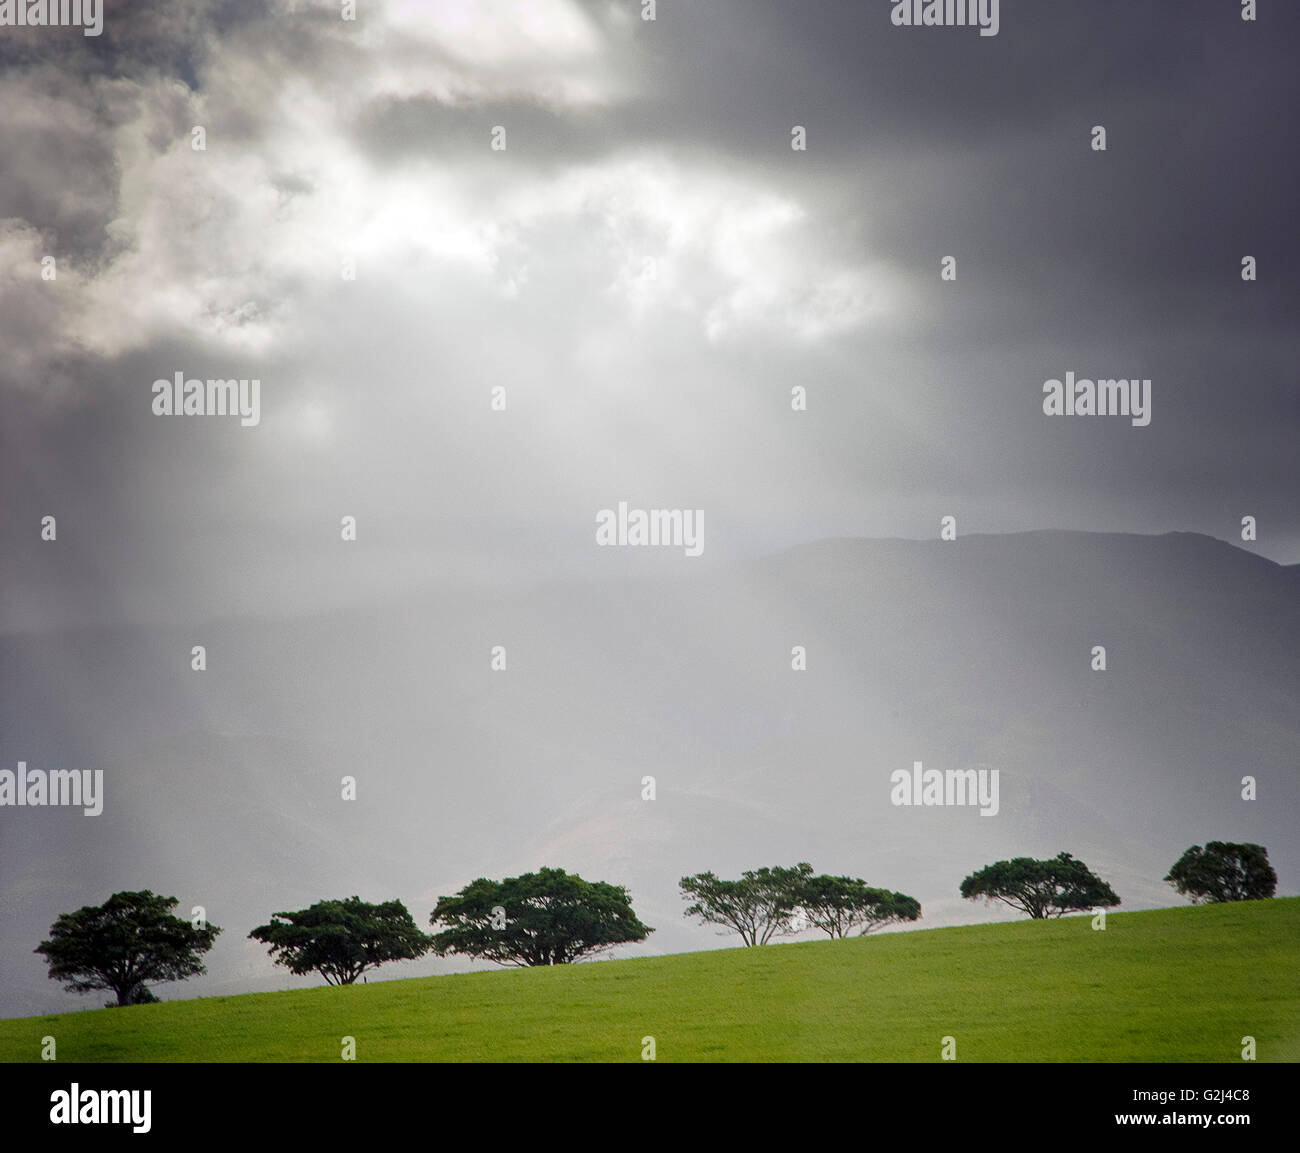 Rays of Light Shining Down Through Clouds on Row of Trees Stock Photo